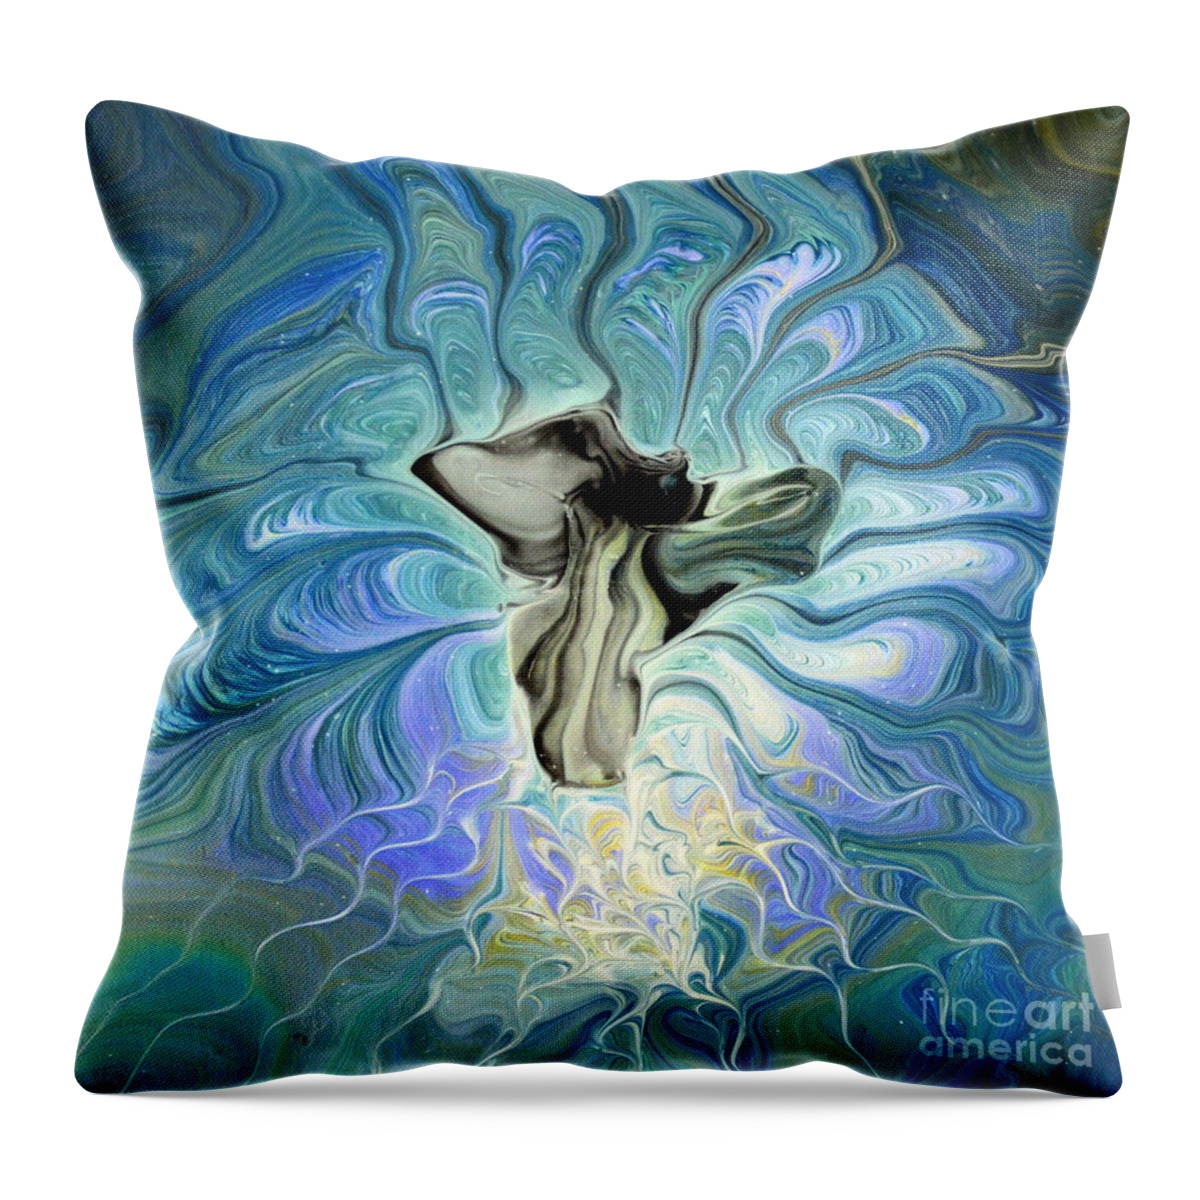 Emerging Throw Pillow featuring the painting Emerging by Maria Martinez